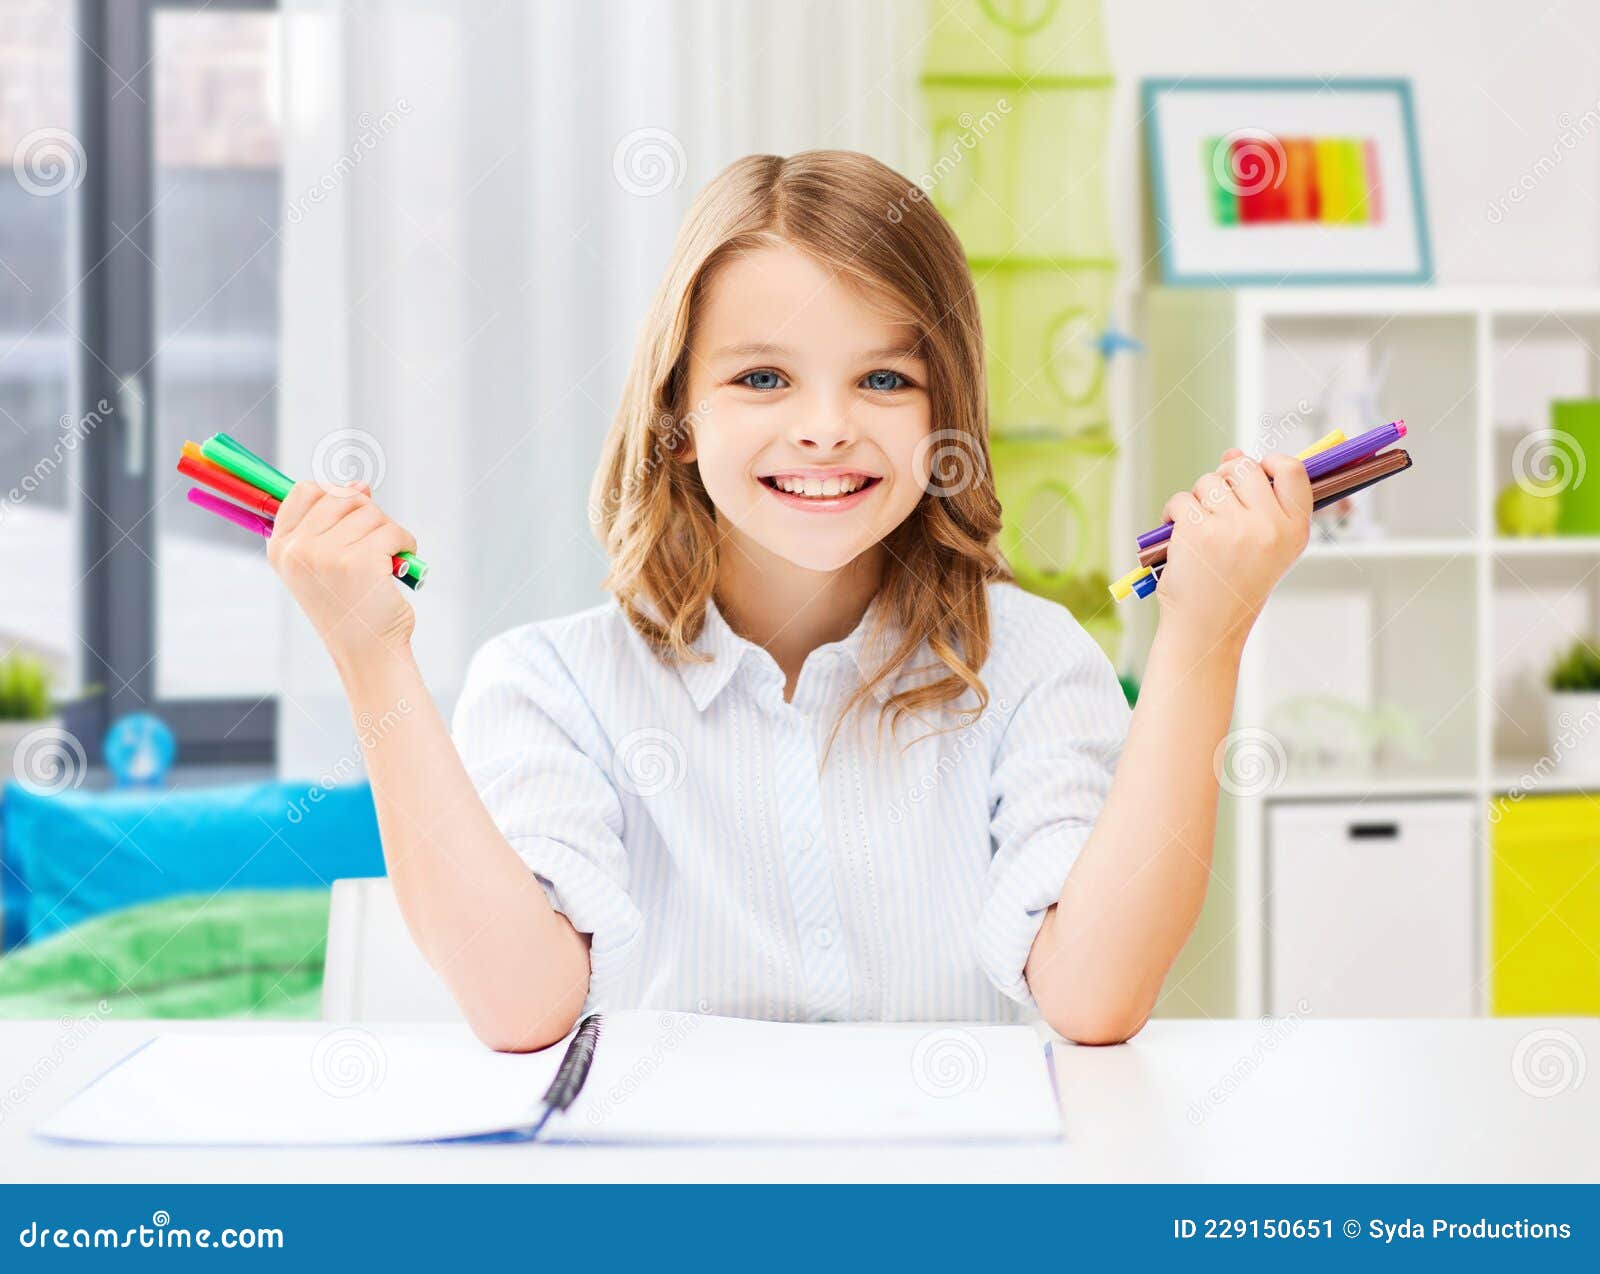 smiling girl with colorful felt-tip pens at home